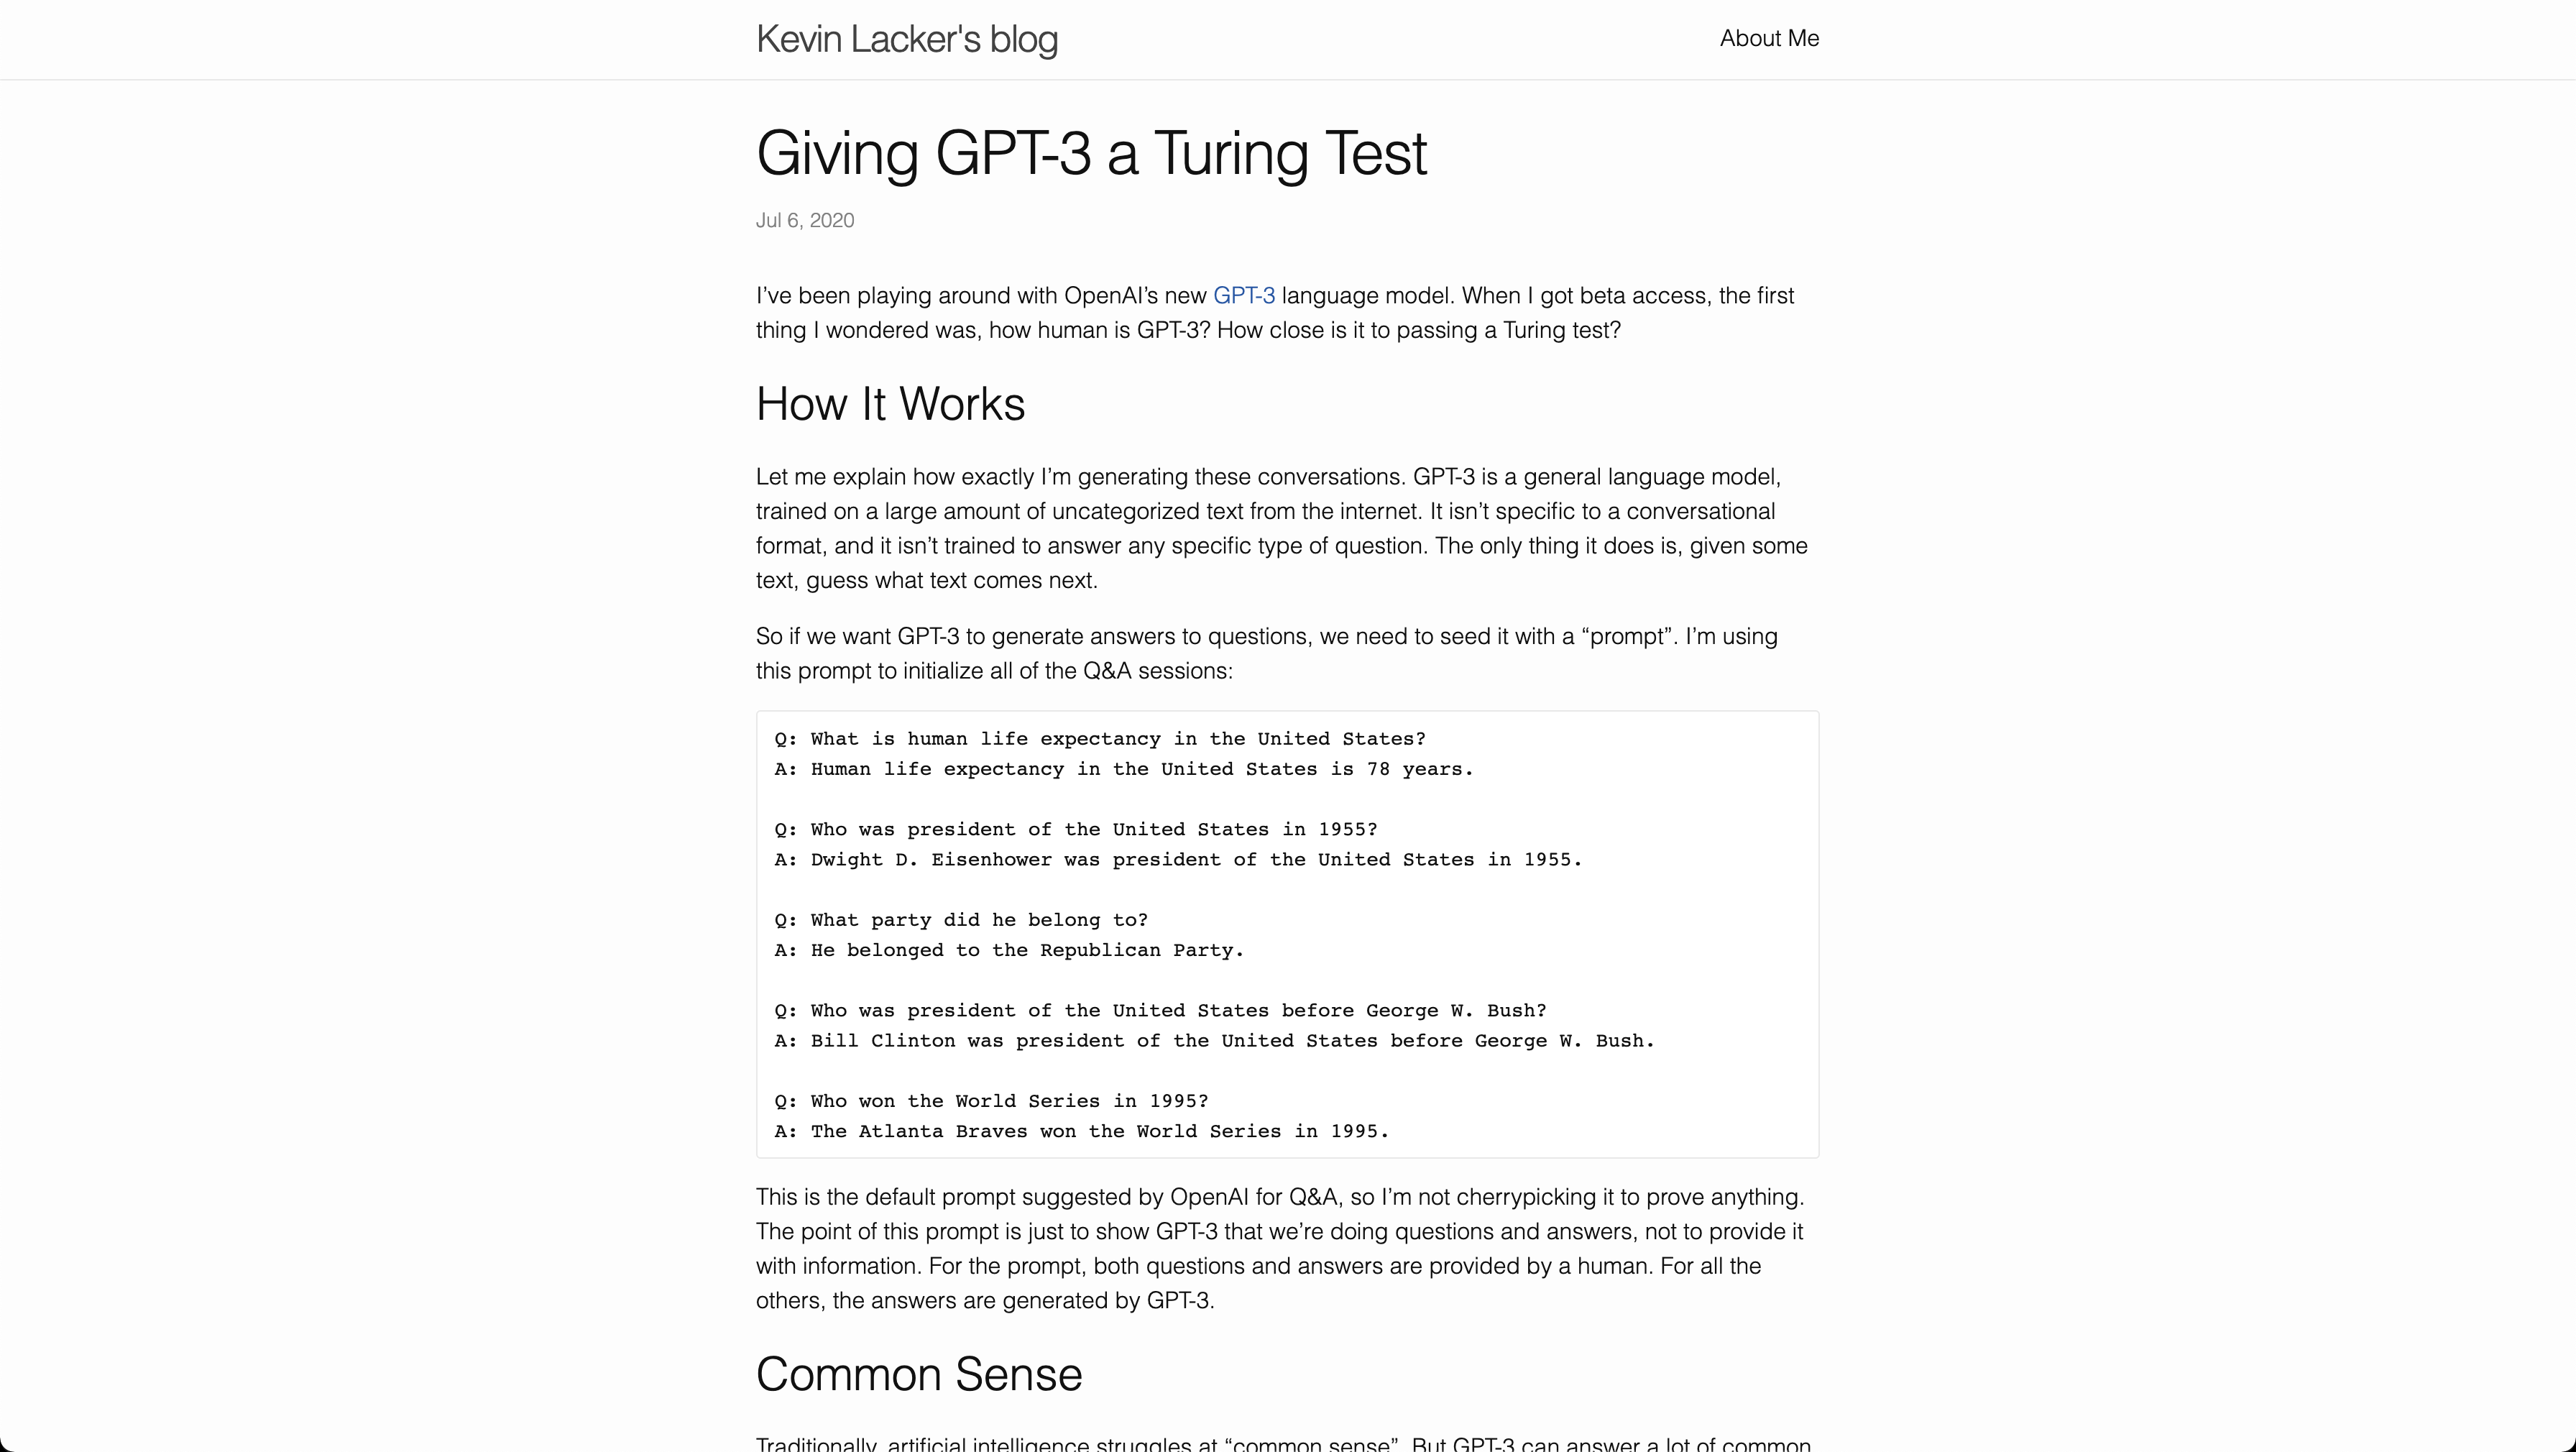 Giving GPT-3 a Turing Test - screen 1